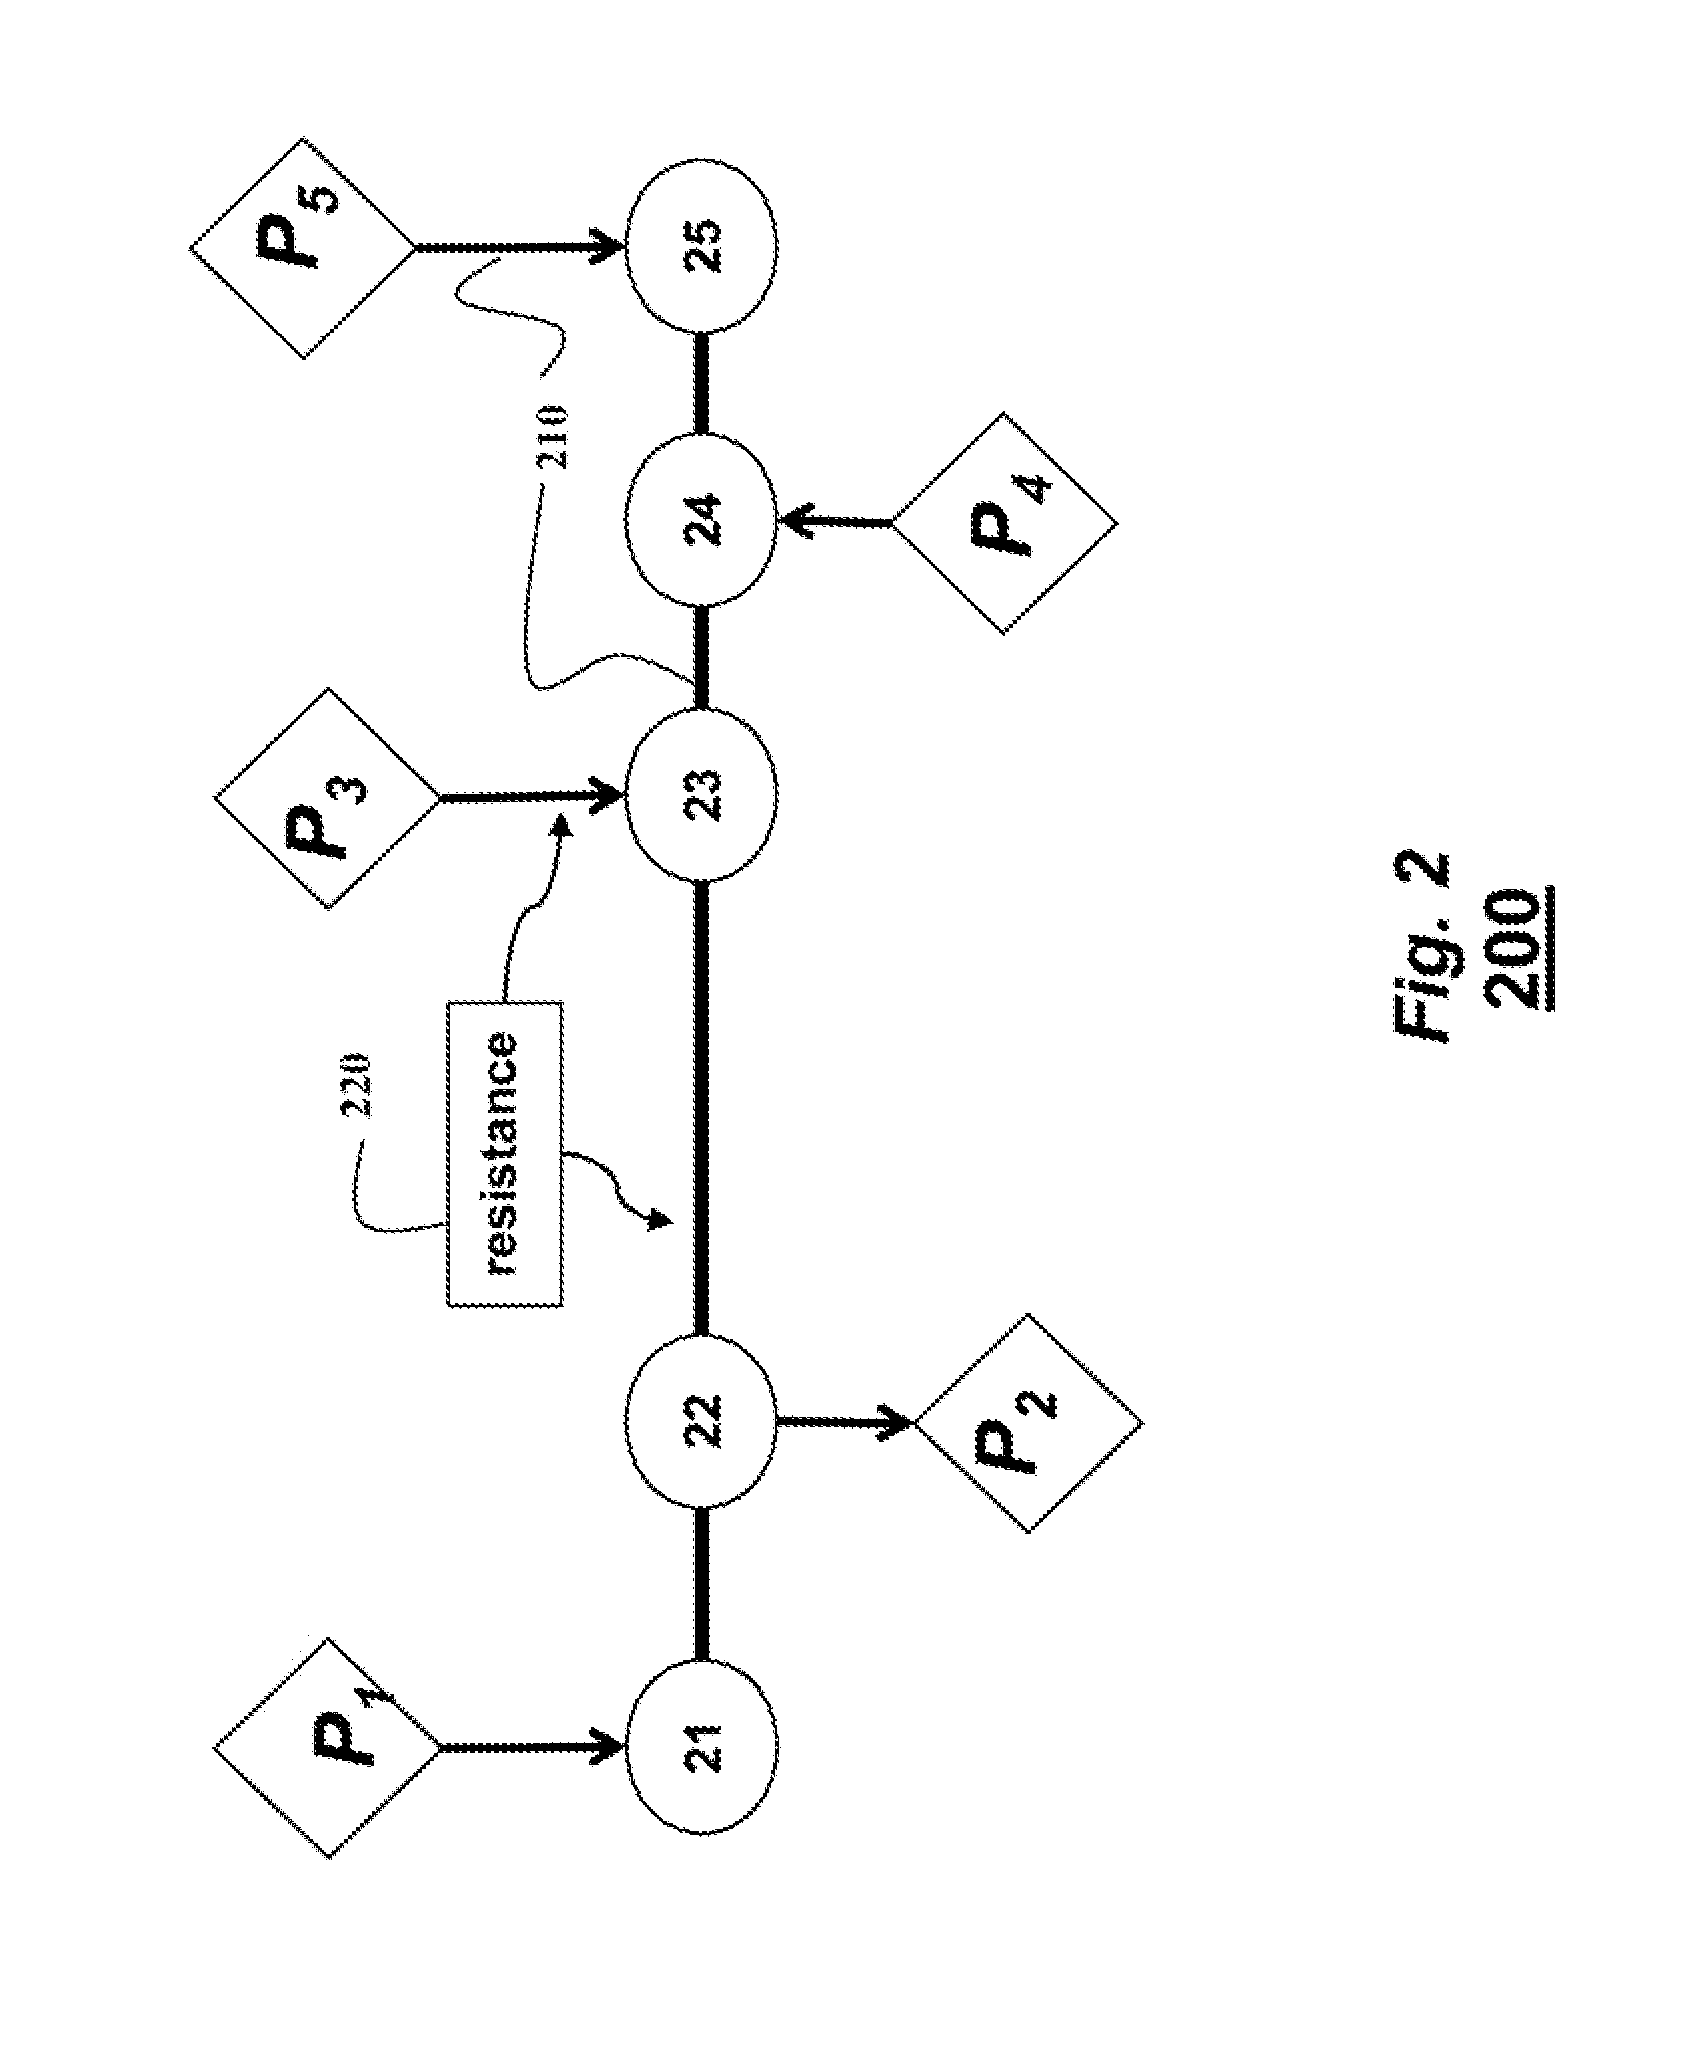 System and method for optimizing energy consumption in railway systems